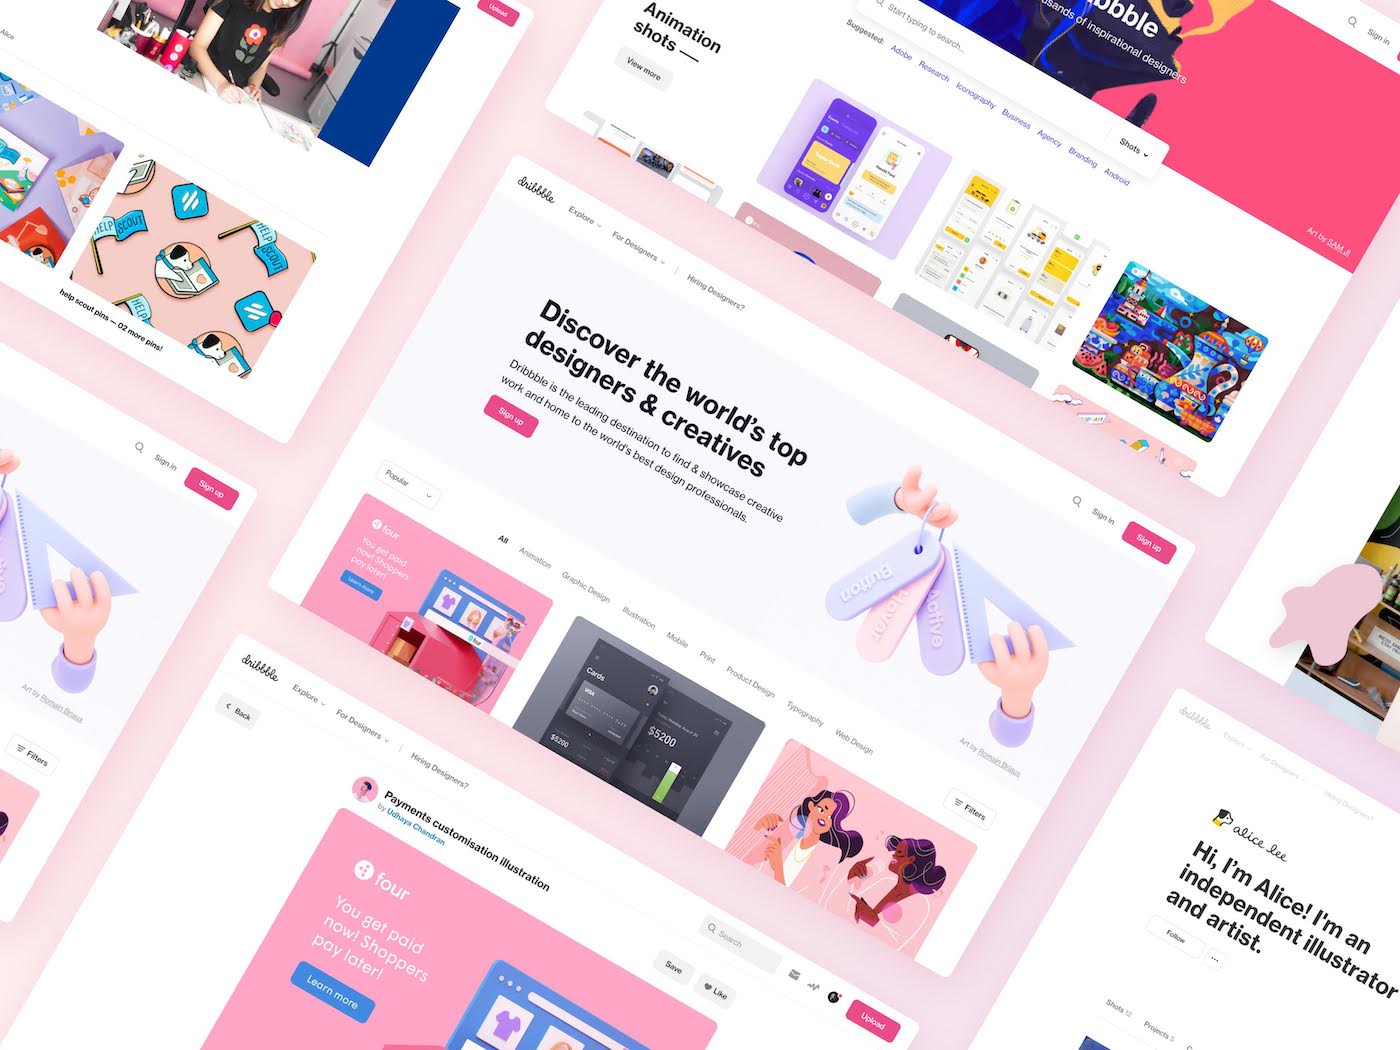 Introducing: A brand new Dribbble | Dribbble Design Blog